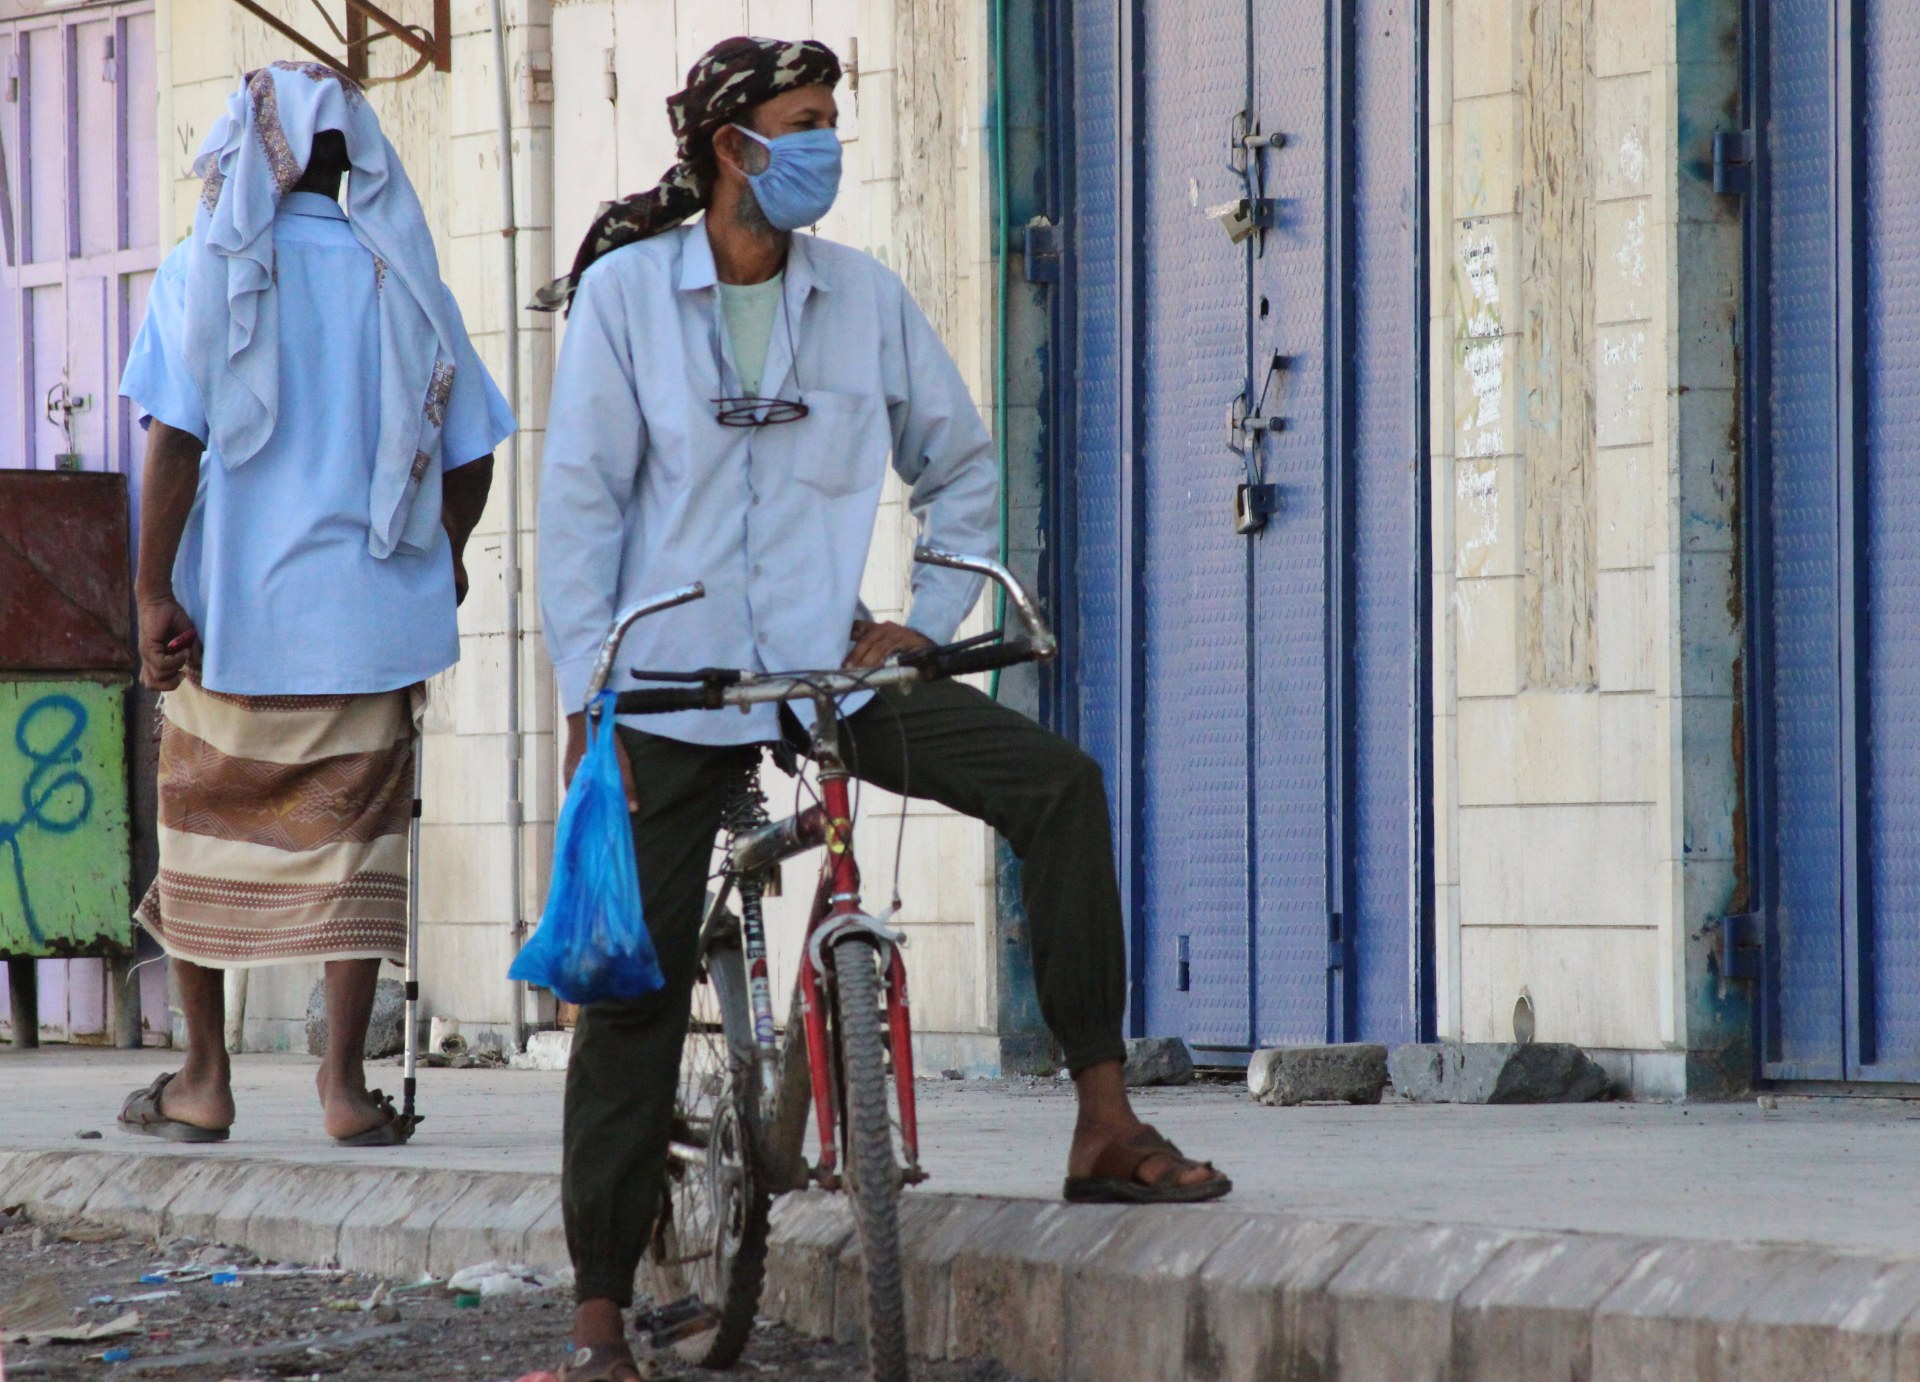 A man wearing a protecitve face mask rides a bicycle during a curfew amid concerns about the spread of the coronavirus disease (COVID-19) in Aden (Reuters)